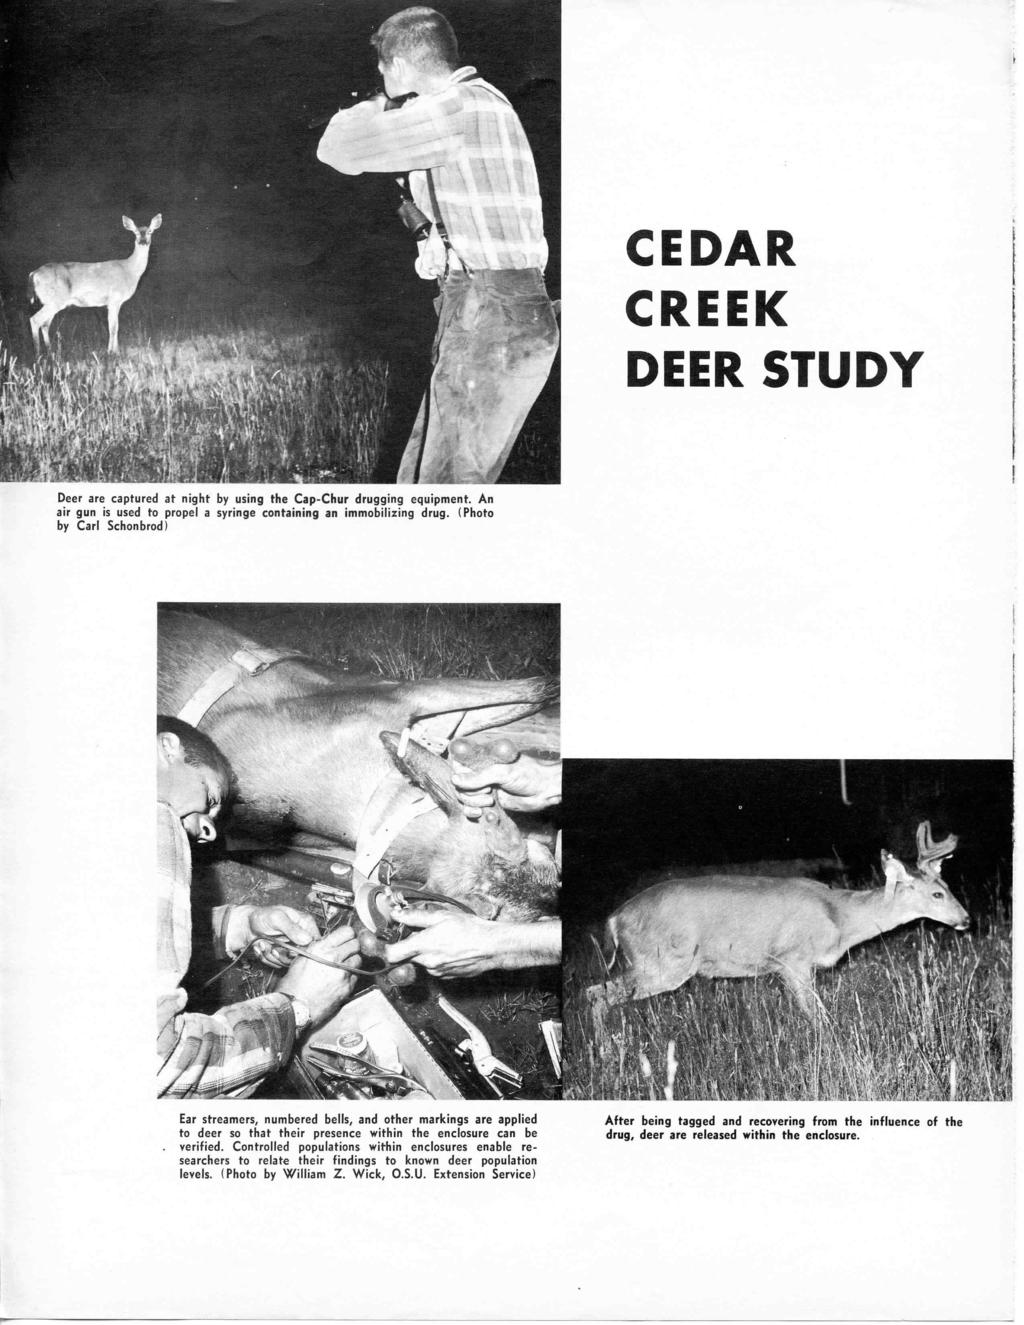 CEDAR CREEK DEER STUDY Deer are captured at night by using the Cap-Chur drugging equipment. An air gun is used to propel a syringe containing an immobilizing drug.